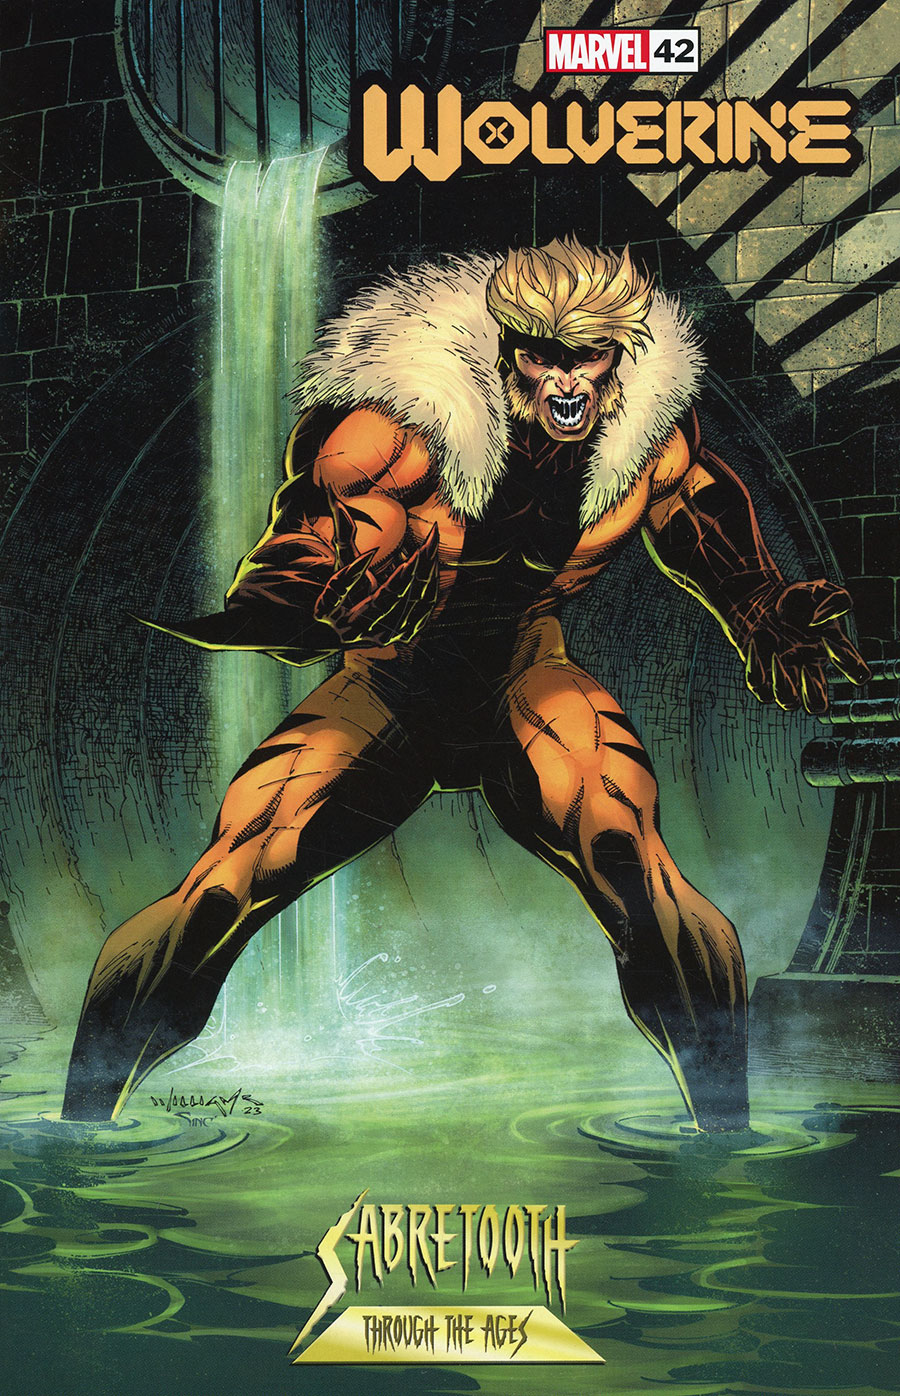 Wolverine Vol 7 #42 Cover B Variant Scott Williams Sabretooth Through The Ages Cover